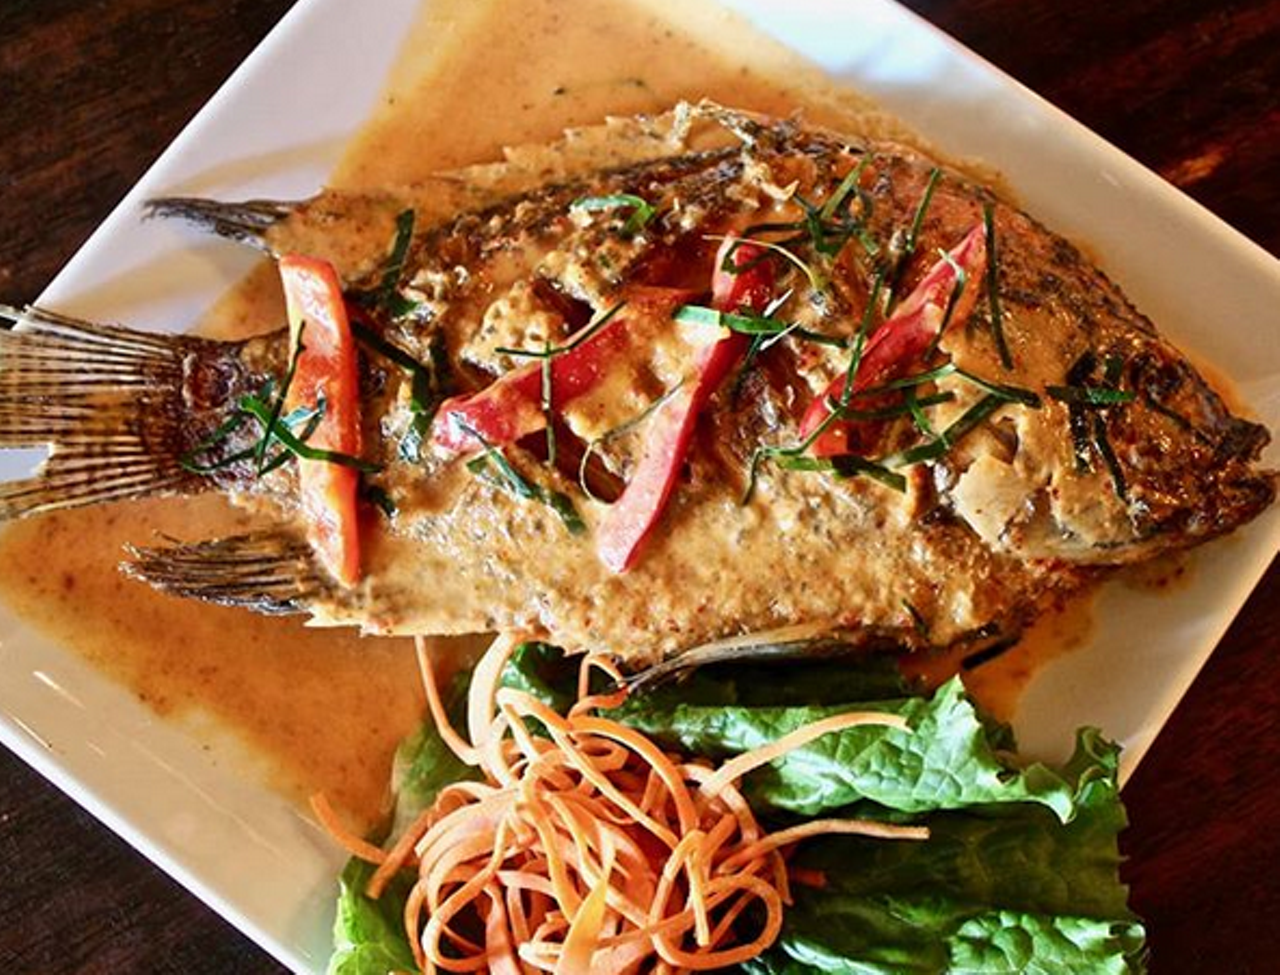 Thai Dee
5307 Blanco Road, (210) 342-3622, thaideesa.com
Featured dishes include authentic Thai delights like Curry Puffs for an appetizer or Banana Spring Rolls for dessert. 
Photo via Instagram /  
thaideesa